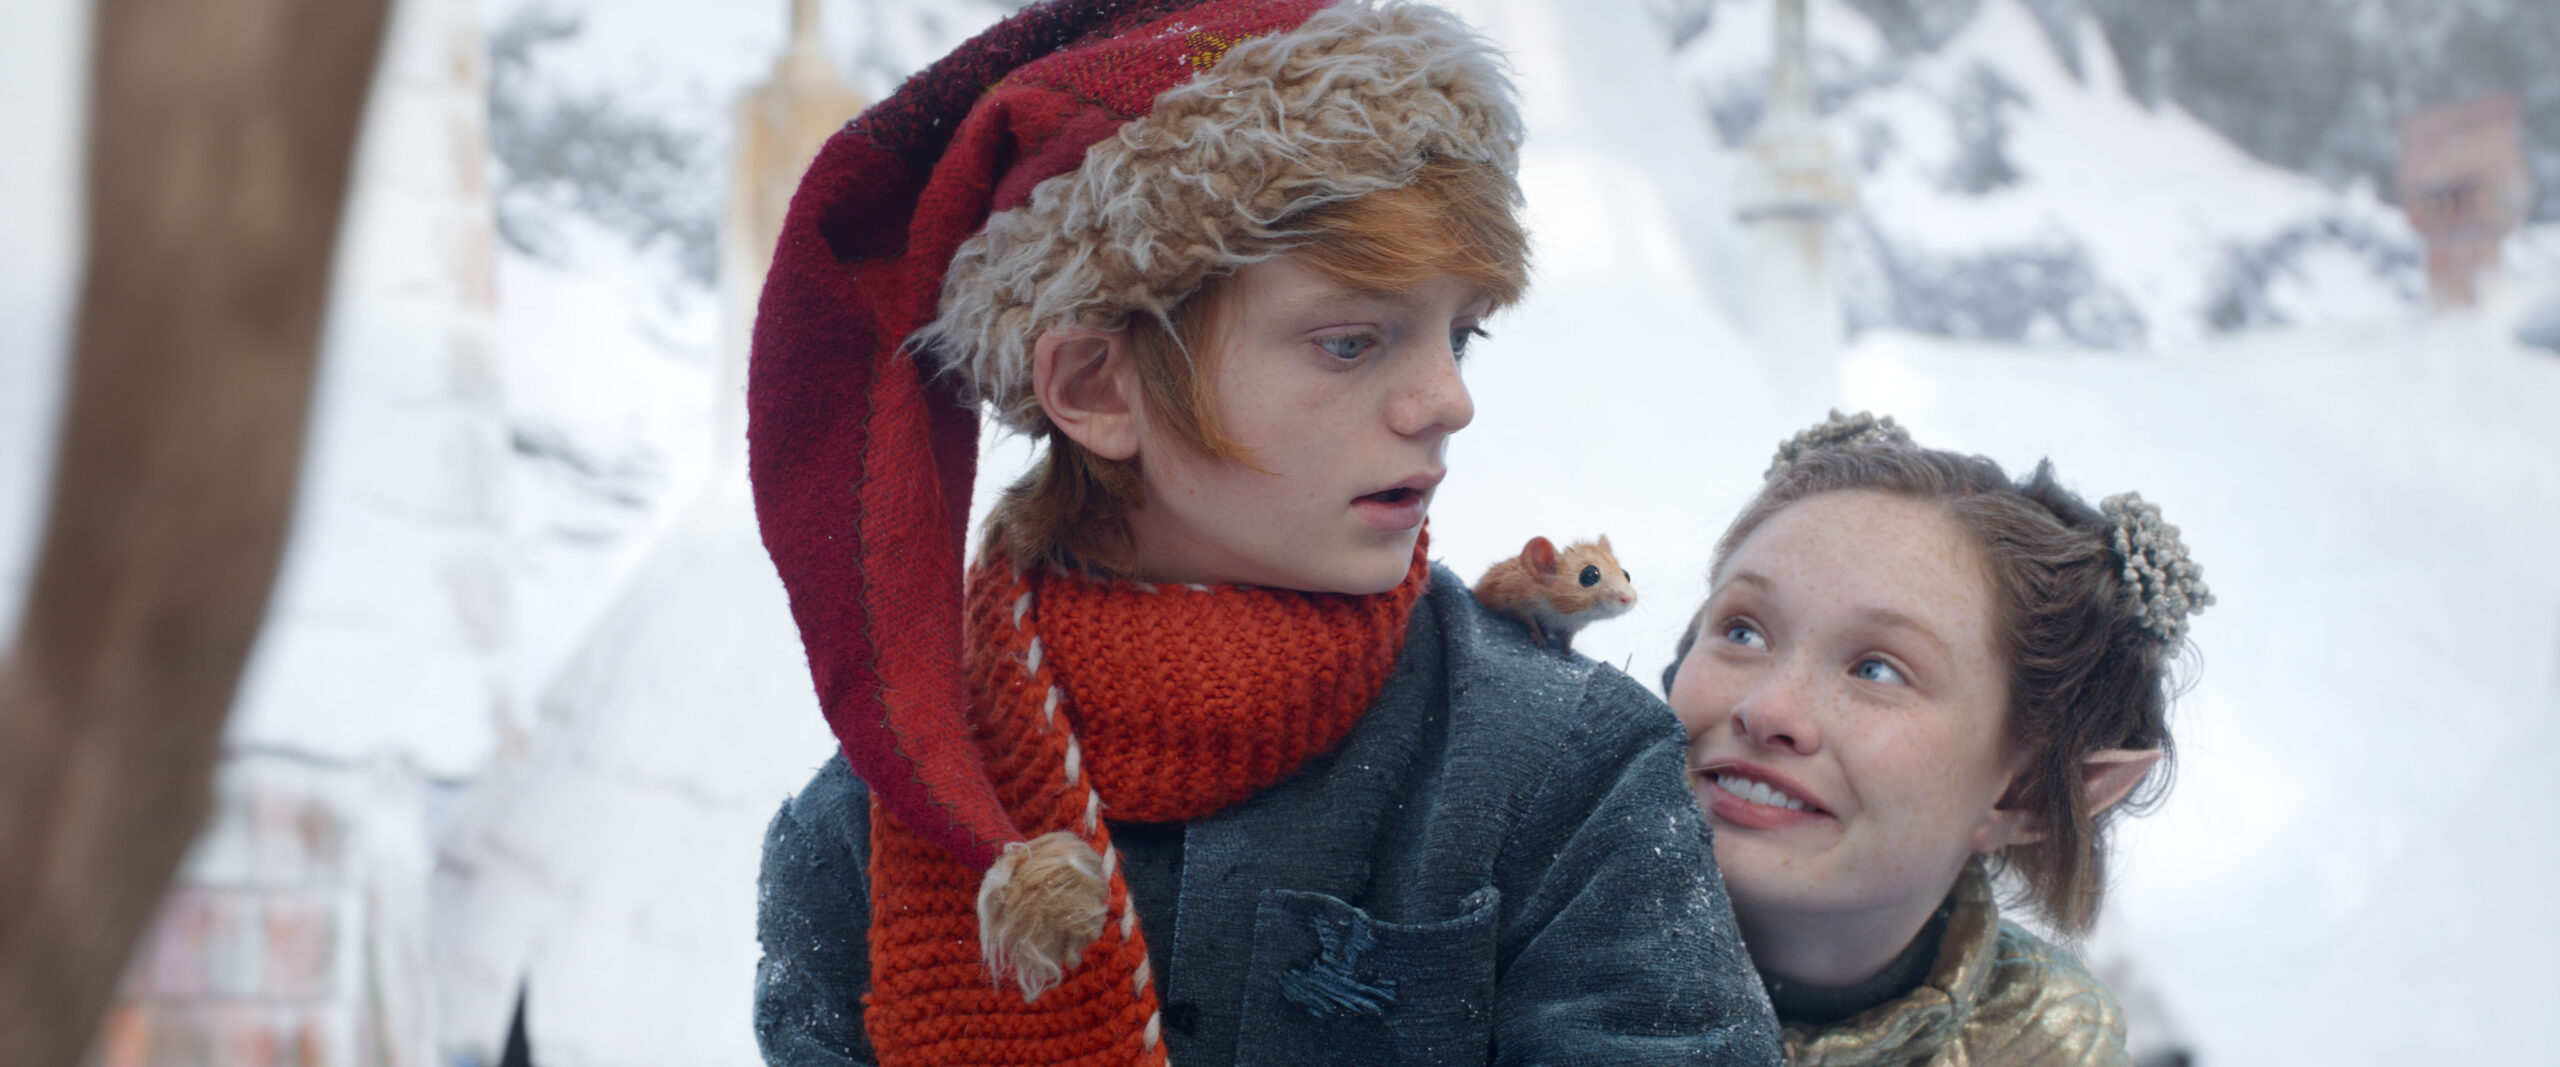 A BOY CALLED CHRISTMAS - (L-R) Henry Lawfull as Nikolas, Miika the Mouse (voiced by Stephen Merchant) and Zoe Margaret Colletti as The Truth Pixie . Cr: NETFLIX © 2021 Netflix US, LLC - Studiocanal SAS